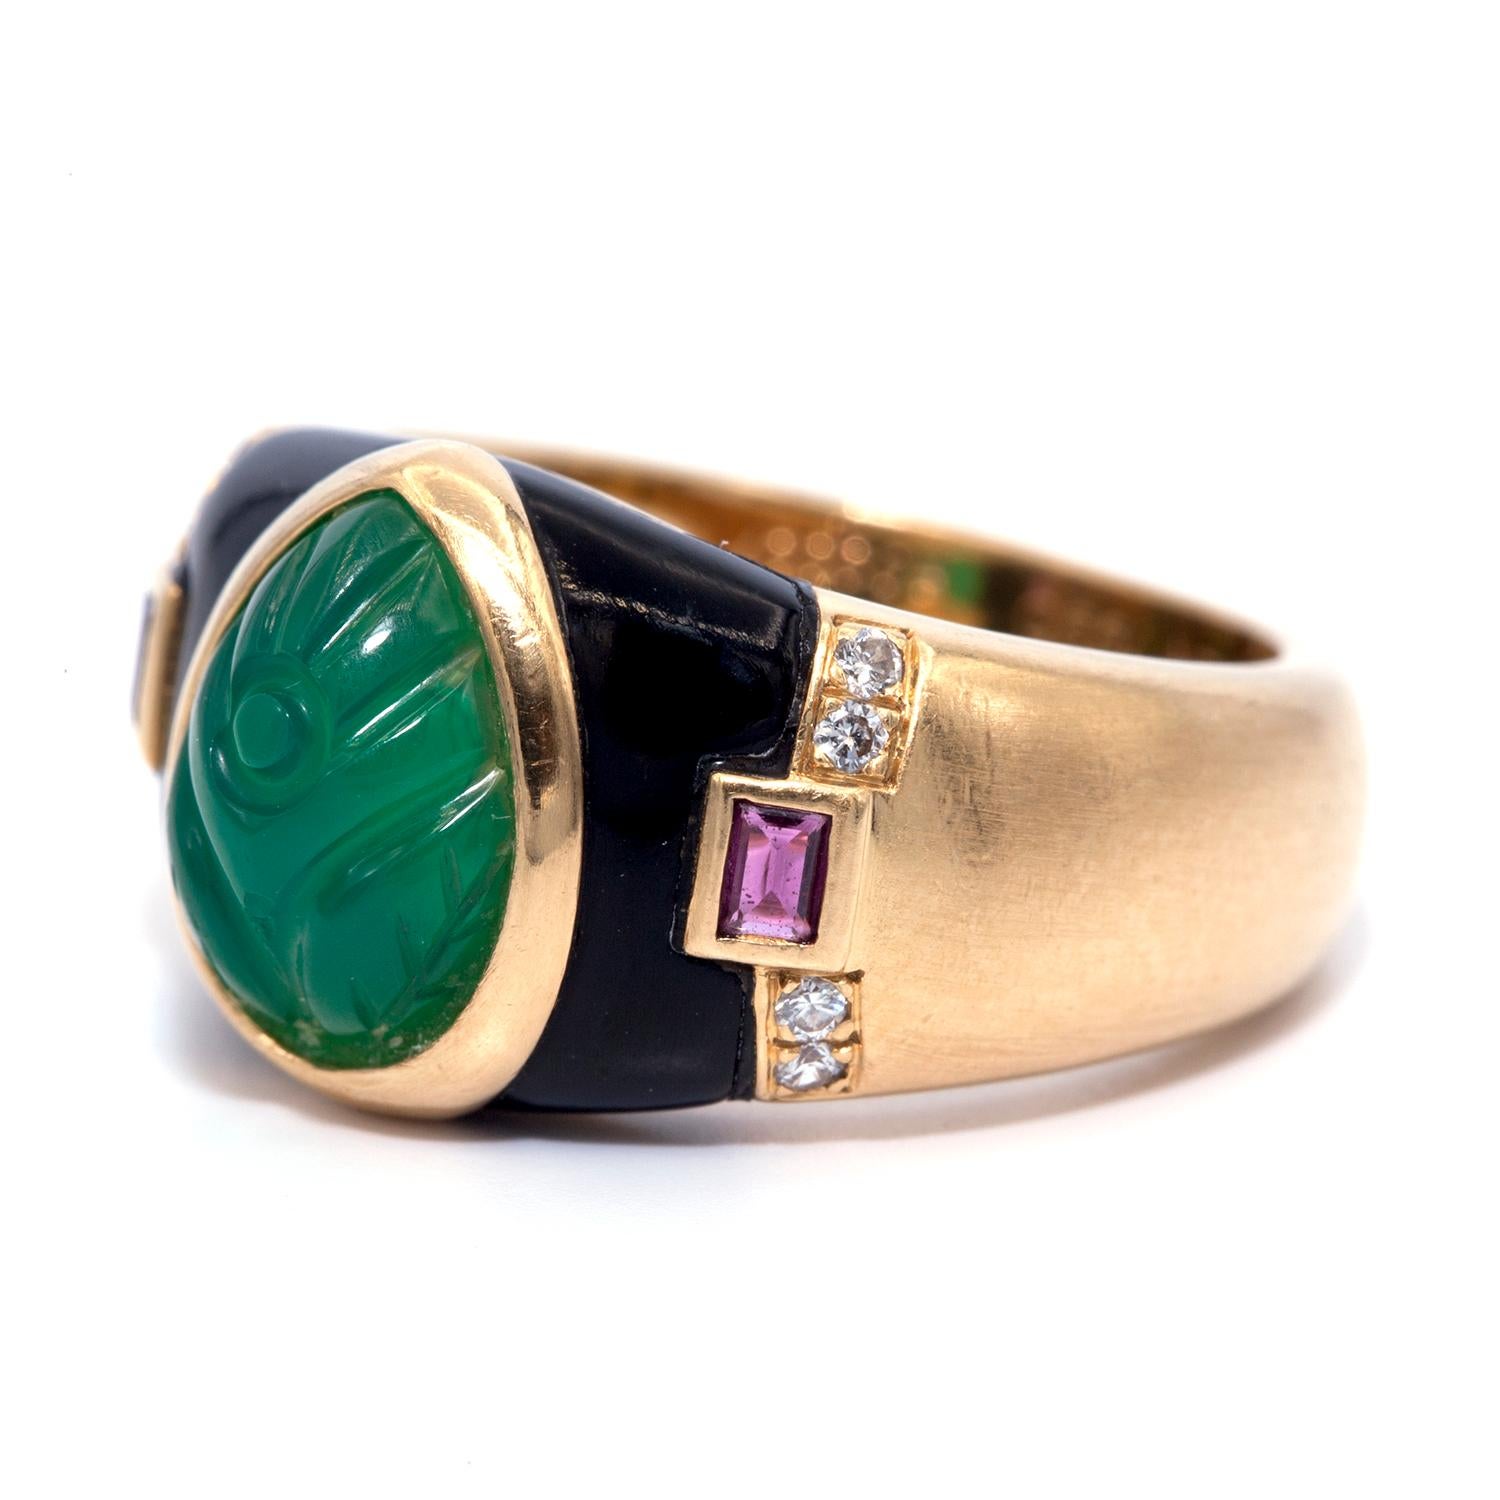 A Cartier true work of art.
the Gaia 18K yellow gold ring showcases a spectacular design. the ring shanks accented with onyx, rubies and approximately 0.04ct of diamonds.
The ring's main attraction is a carved emerald stone.
Ring Size: 5.5 
0.5cm